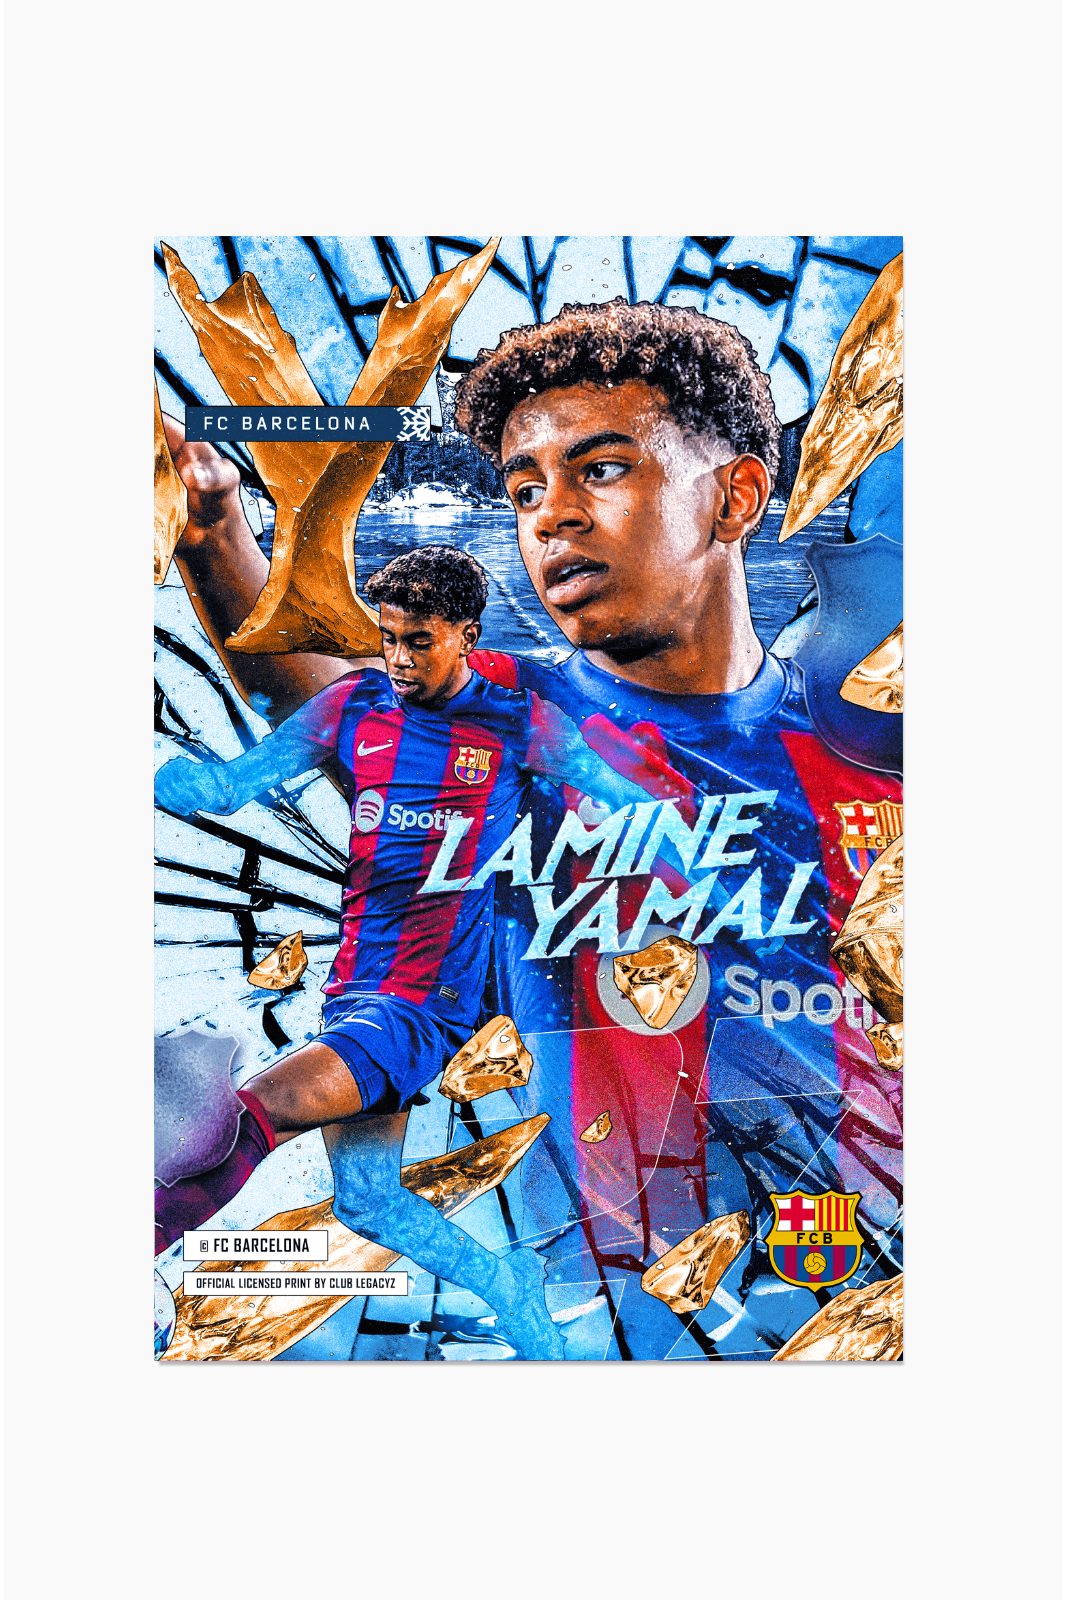 FC Barcelona - Lamine Yamal Frozen poster limited to 100